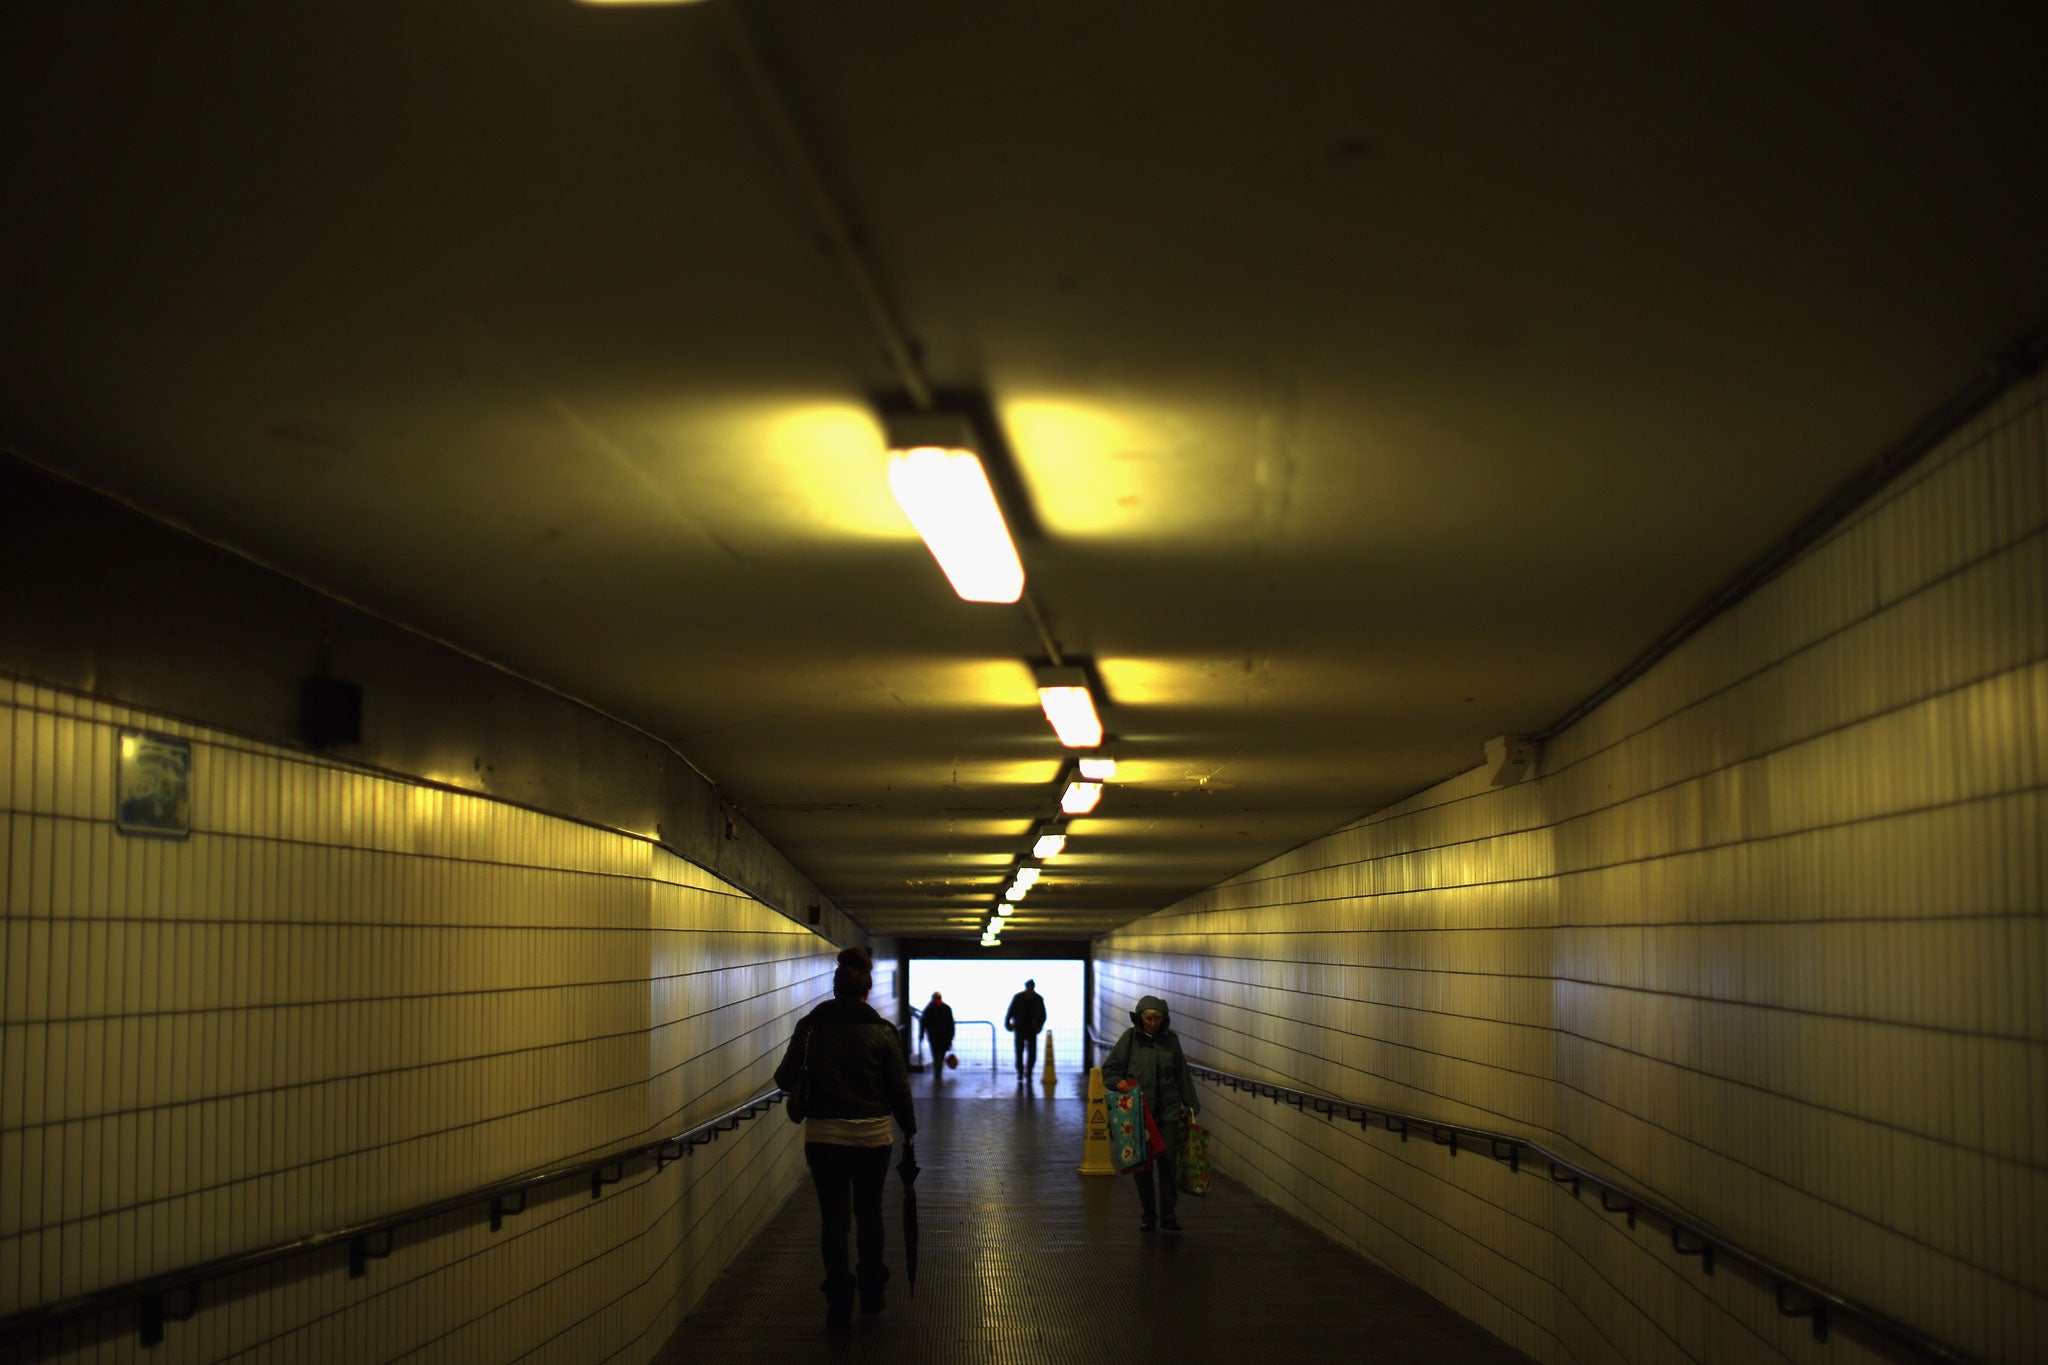 The underground walkways are said to be 'a muggers' paradise